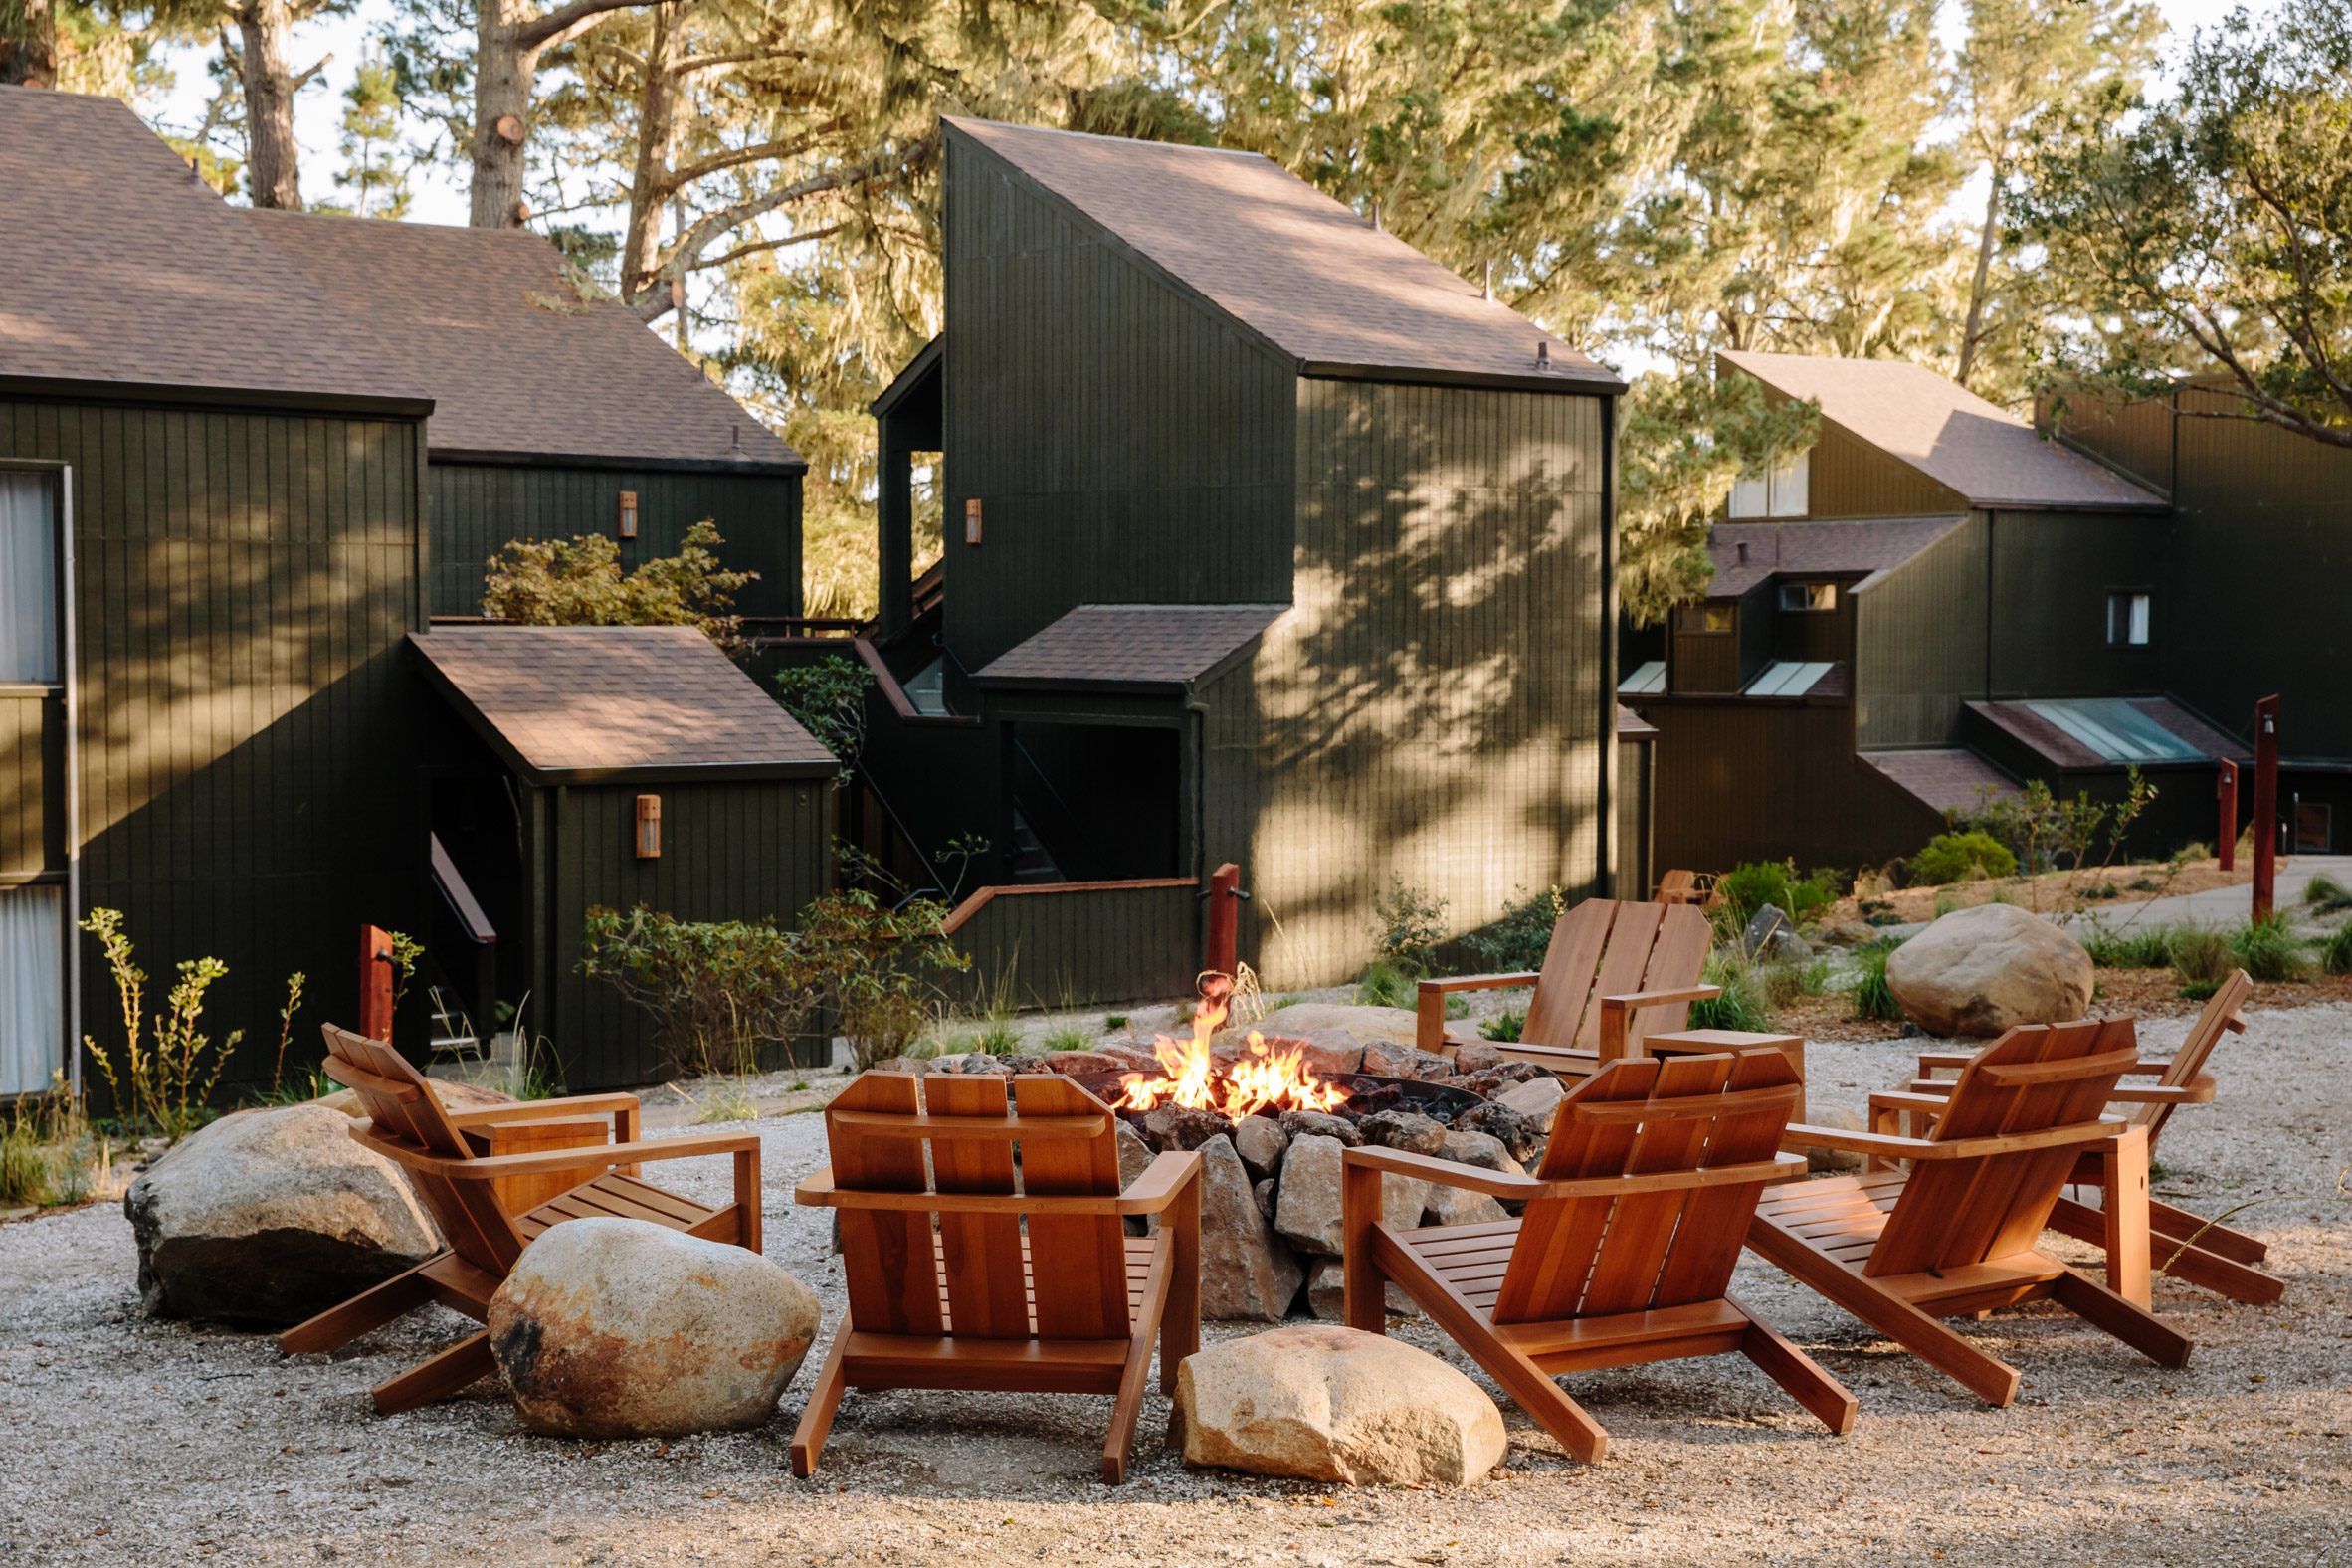 Wooden chairs surrounding a fire pit with blackened wood buildings in the background